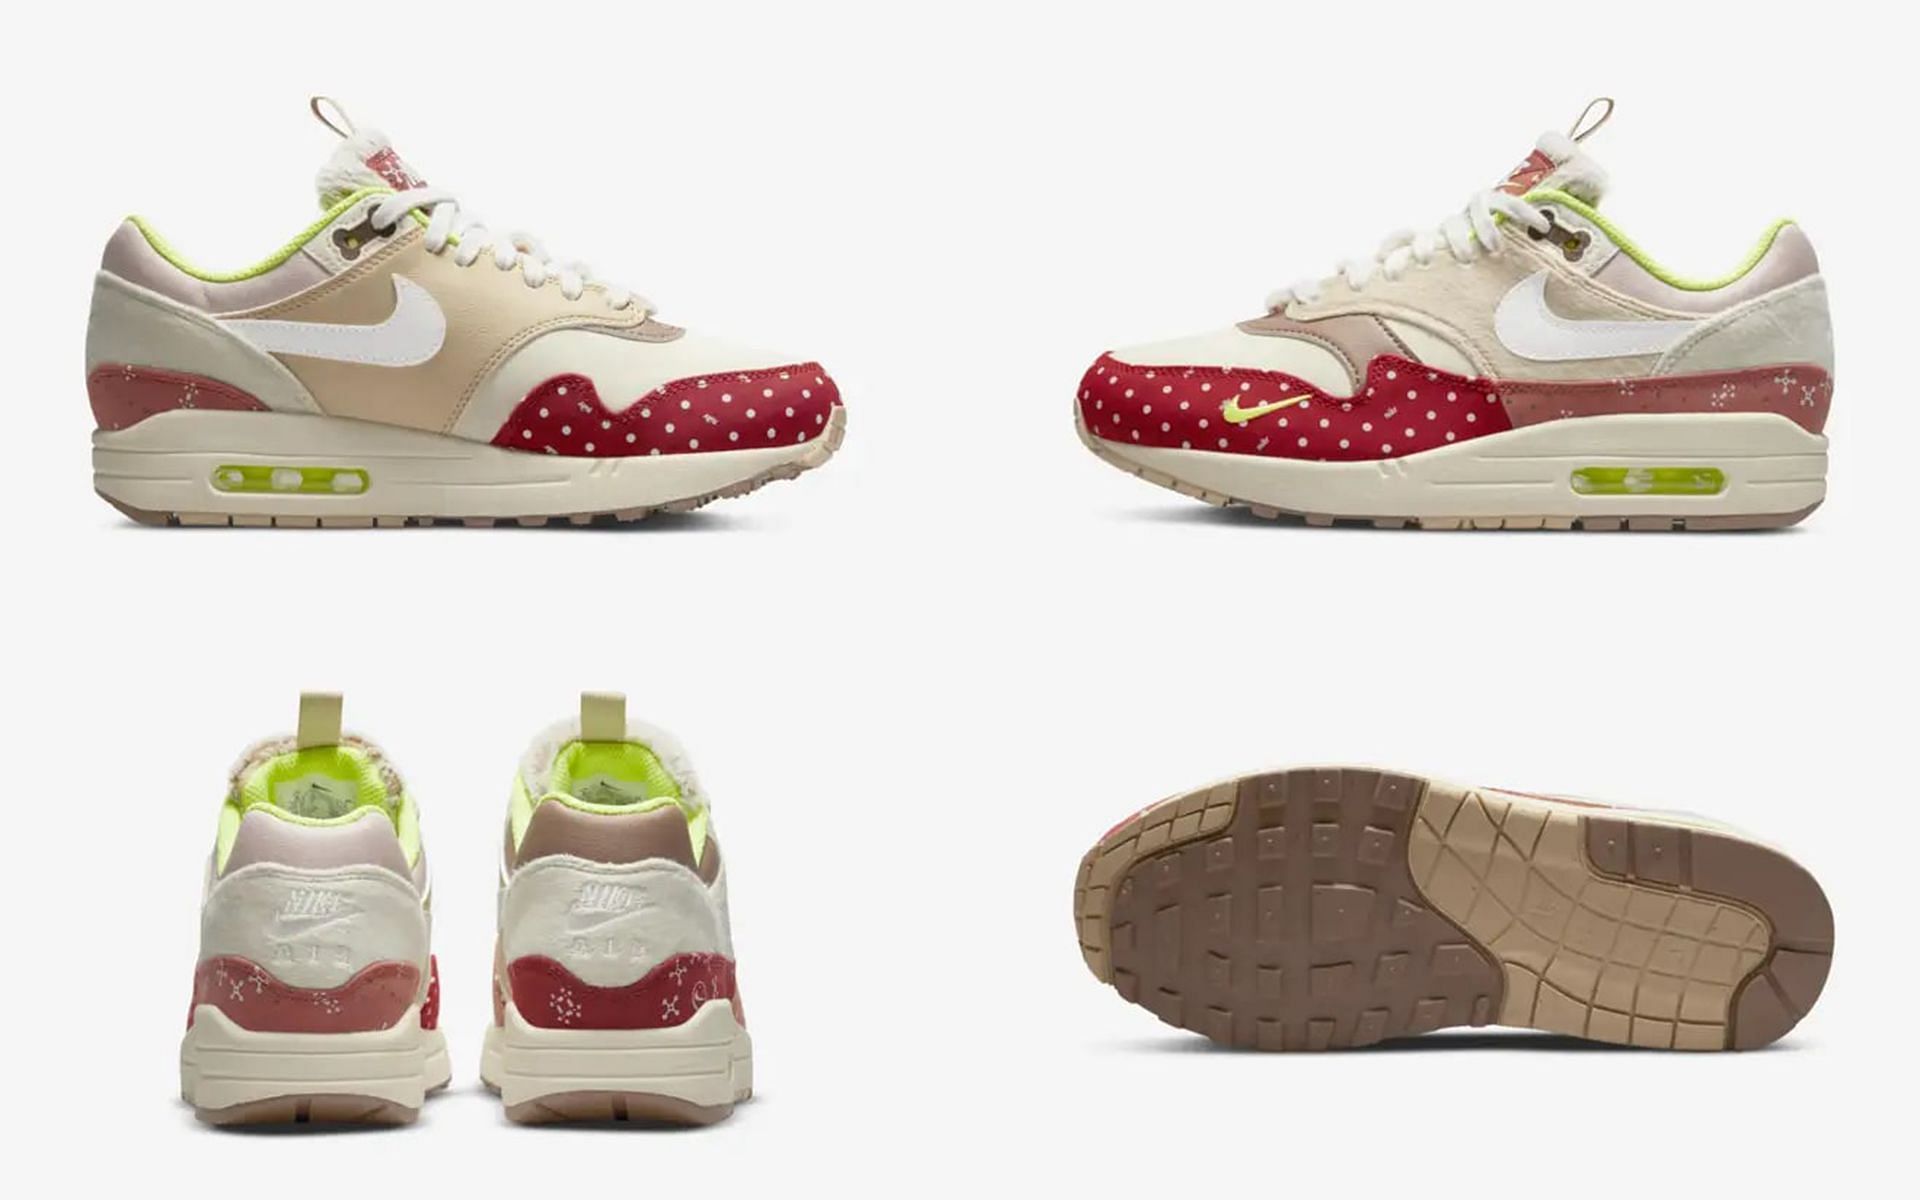 Upcoming Air Max 1 Best Friend inspired by Chinese Pastoral dog (Image via Nike)